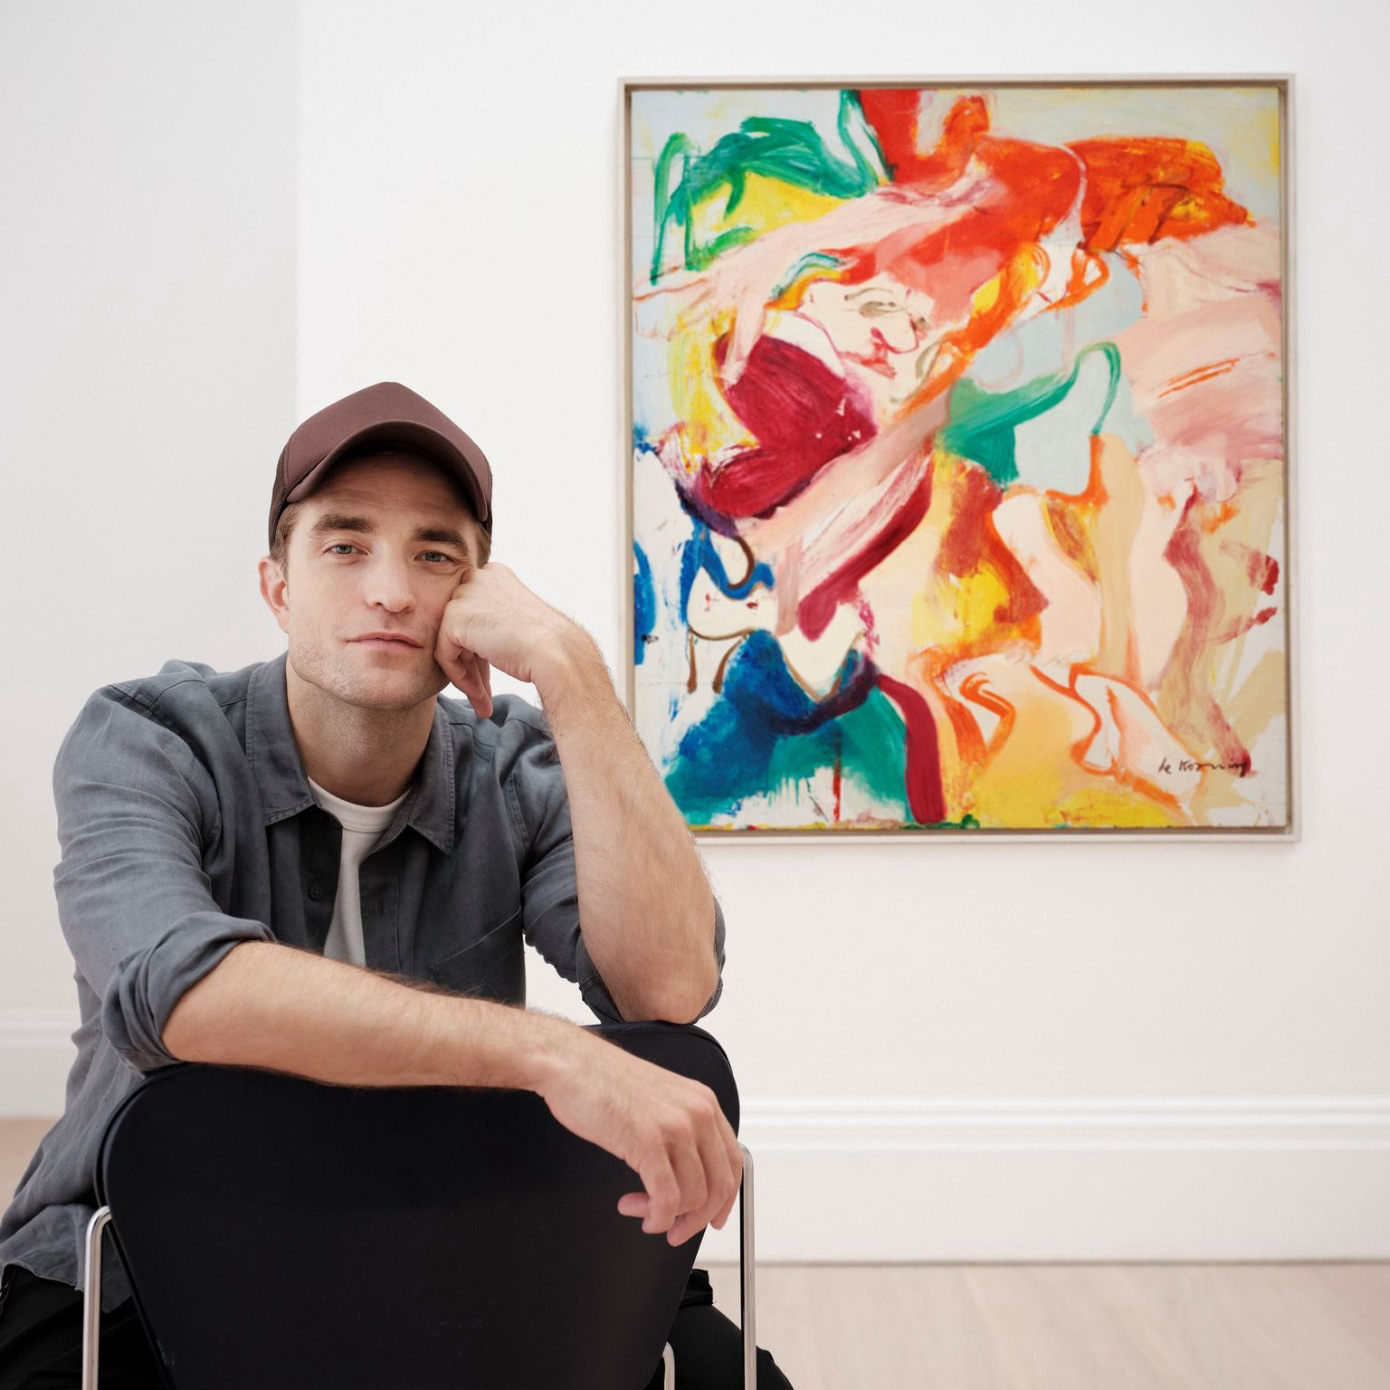 Robert Pattinson pictured with Willem de Kooning's Untitled, 1964.